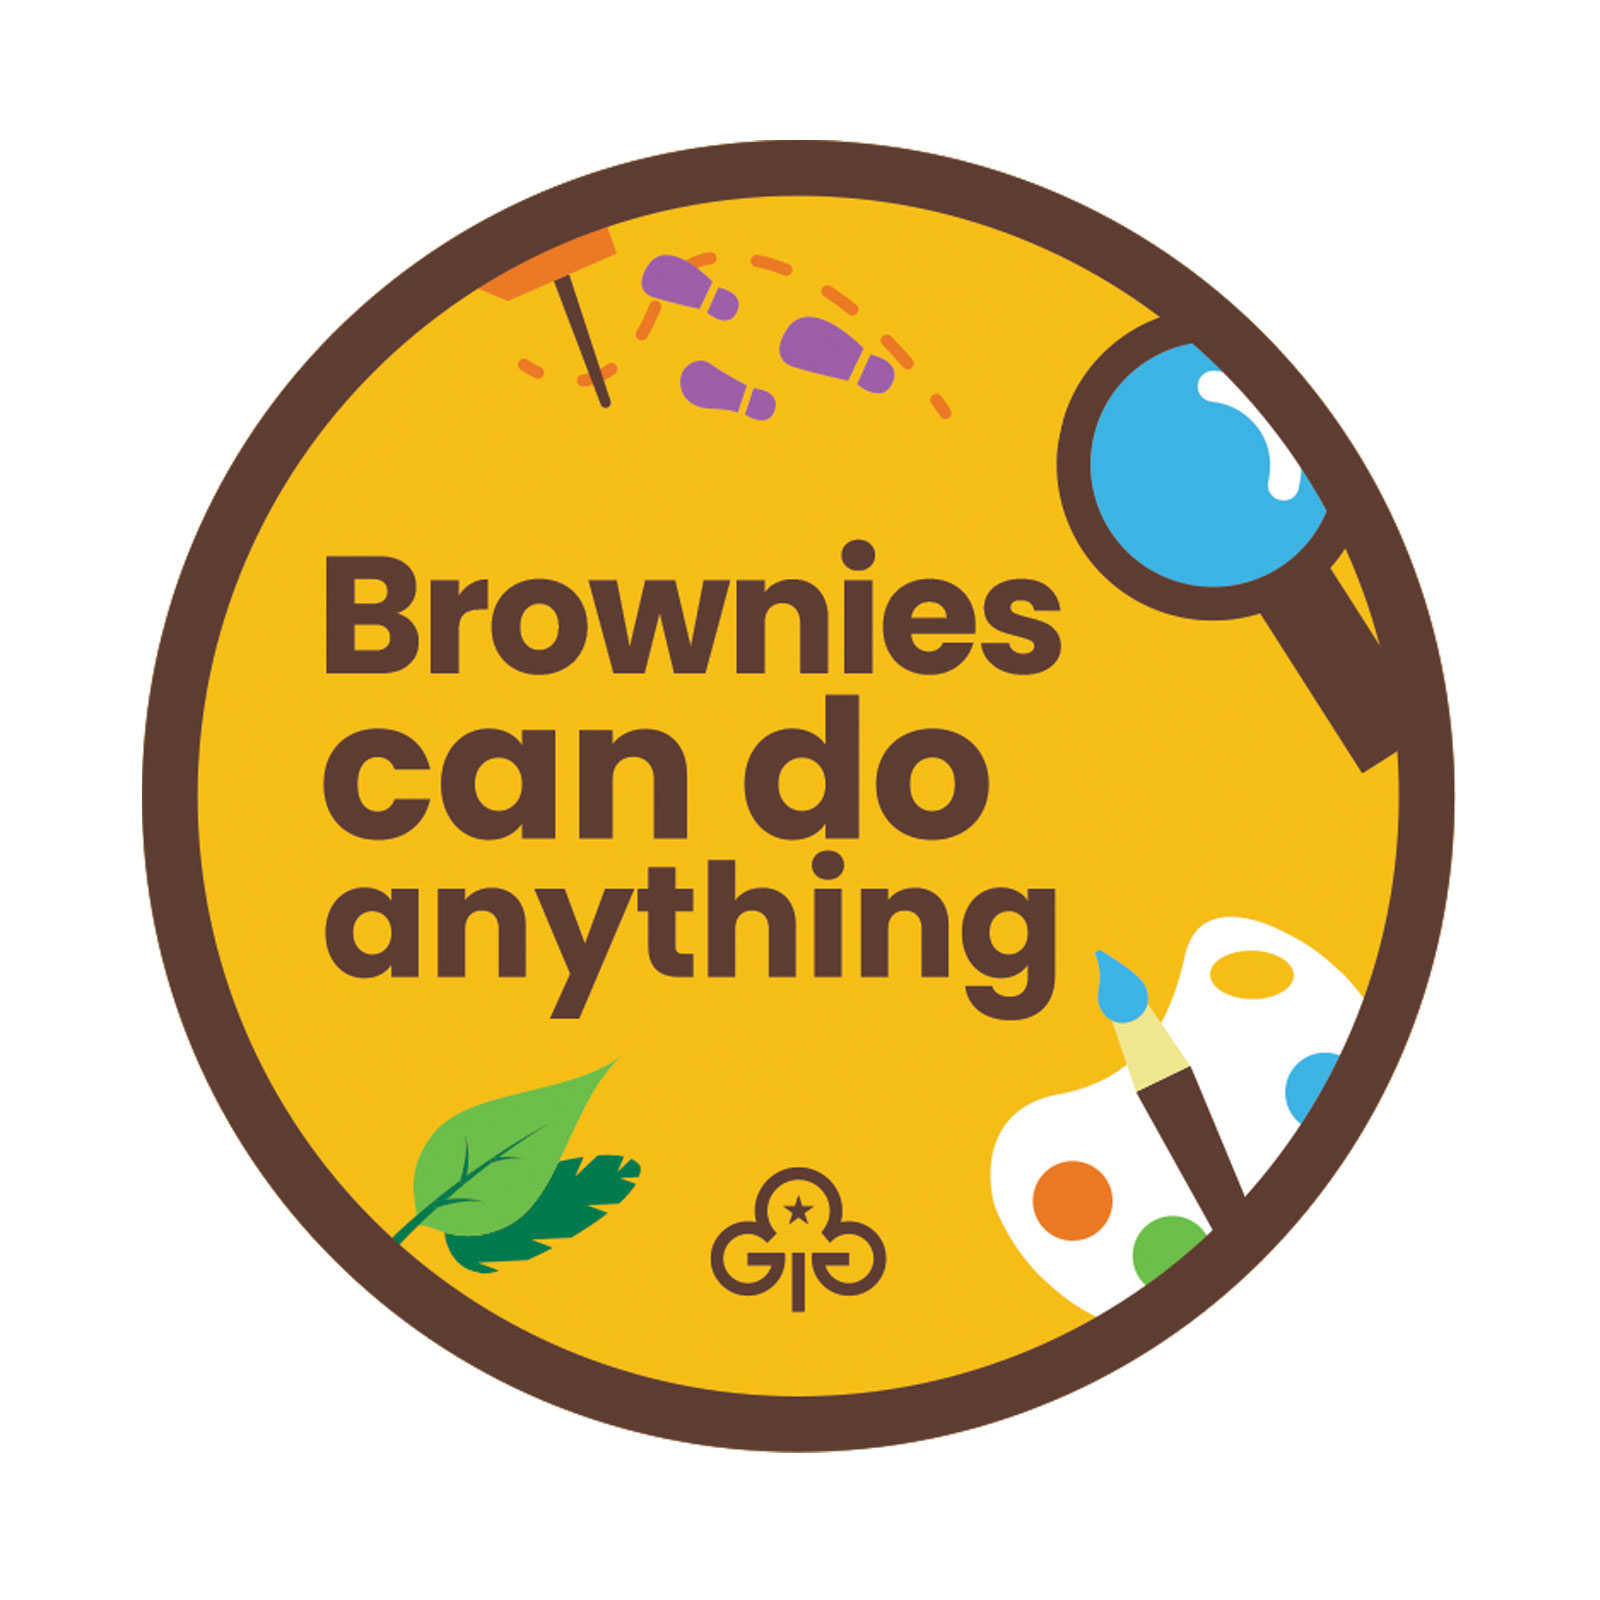 image relating to Brownie Activity Pack